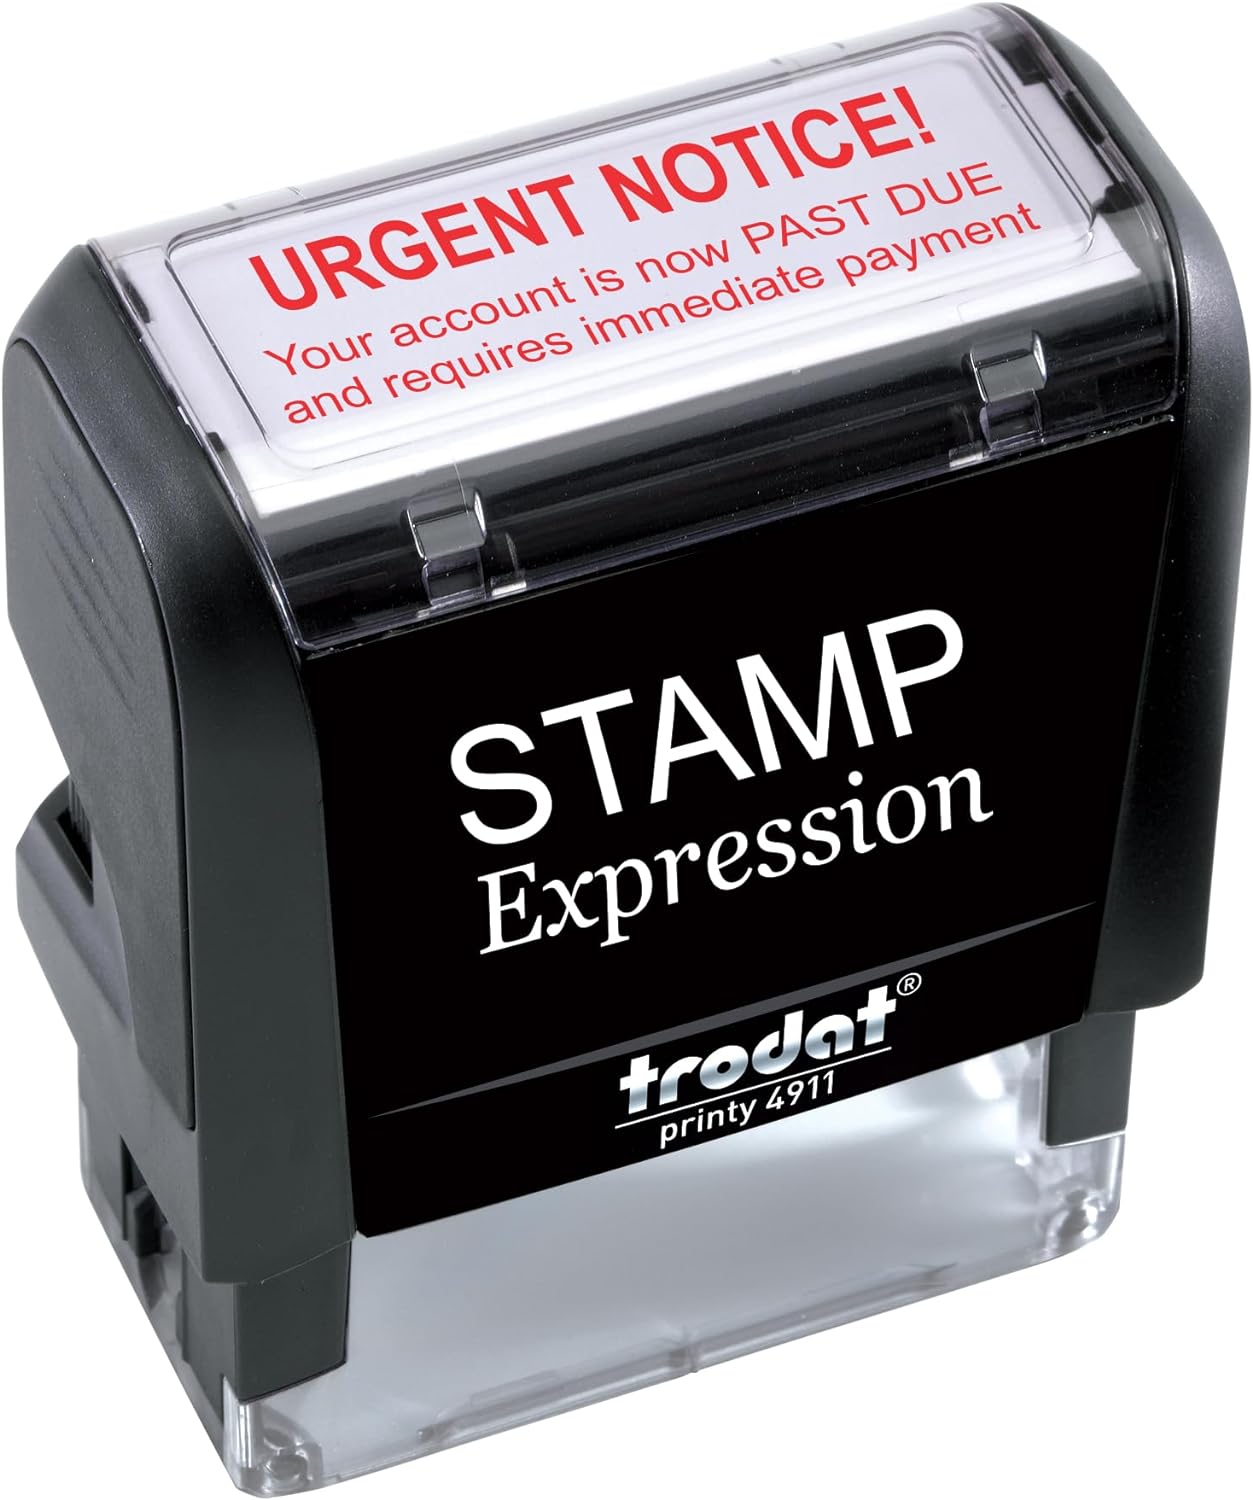 Past Due! Urgent Notice Your Account is Now Past Due and Requires Immediate Payment Office Self Inking Rubber Stamp (SH-5979)